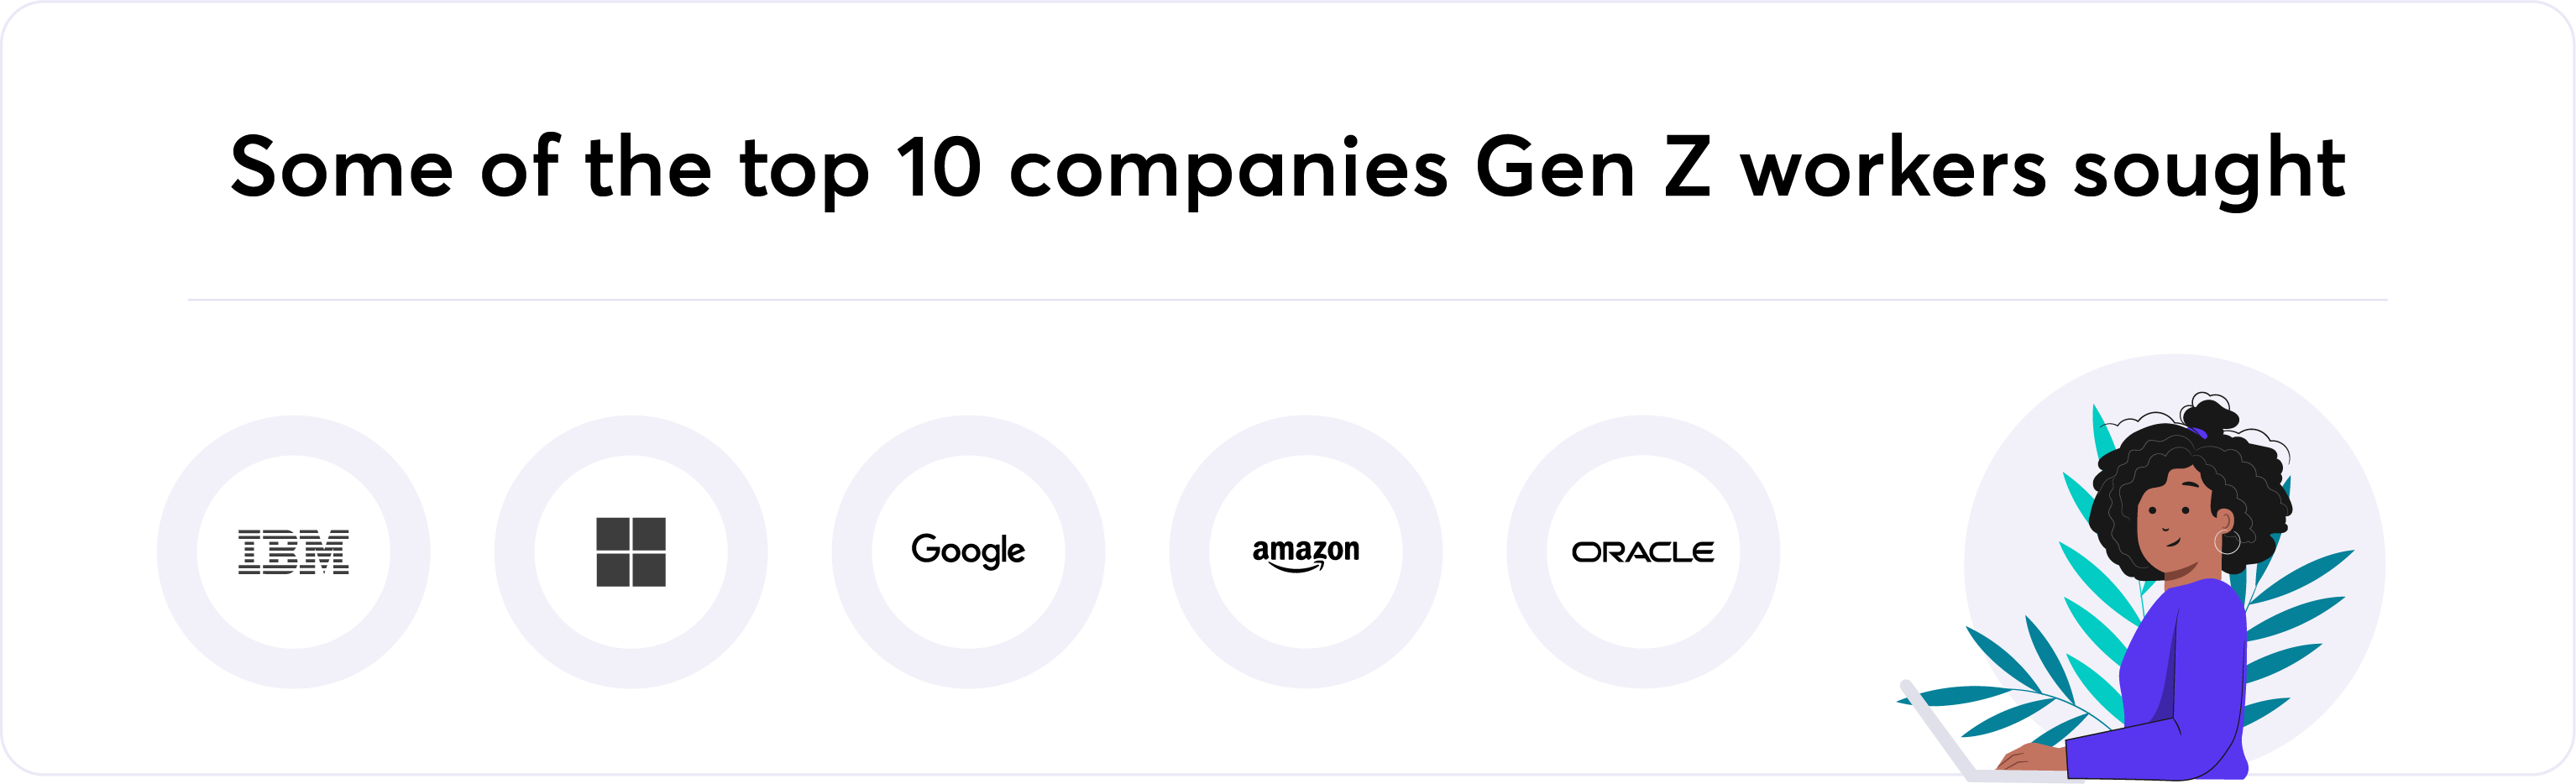 Some of the top 10 companies Gen Z workers sought graphic